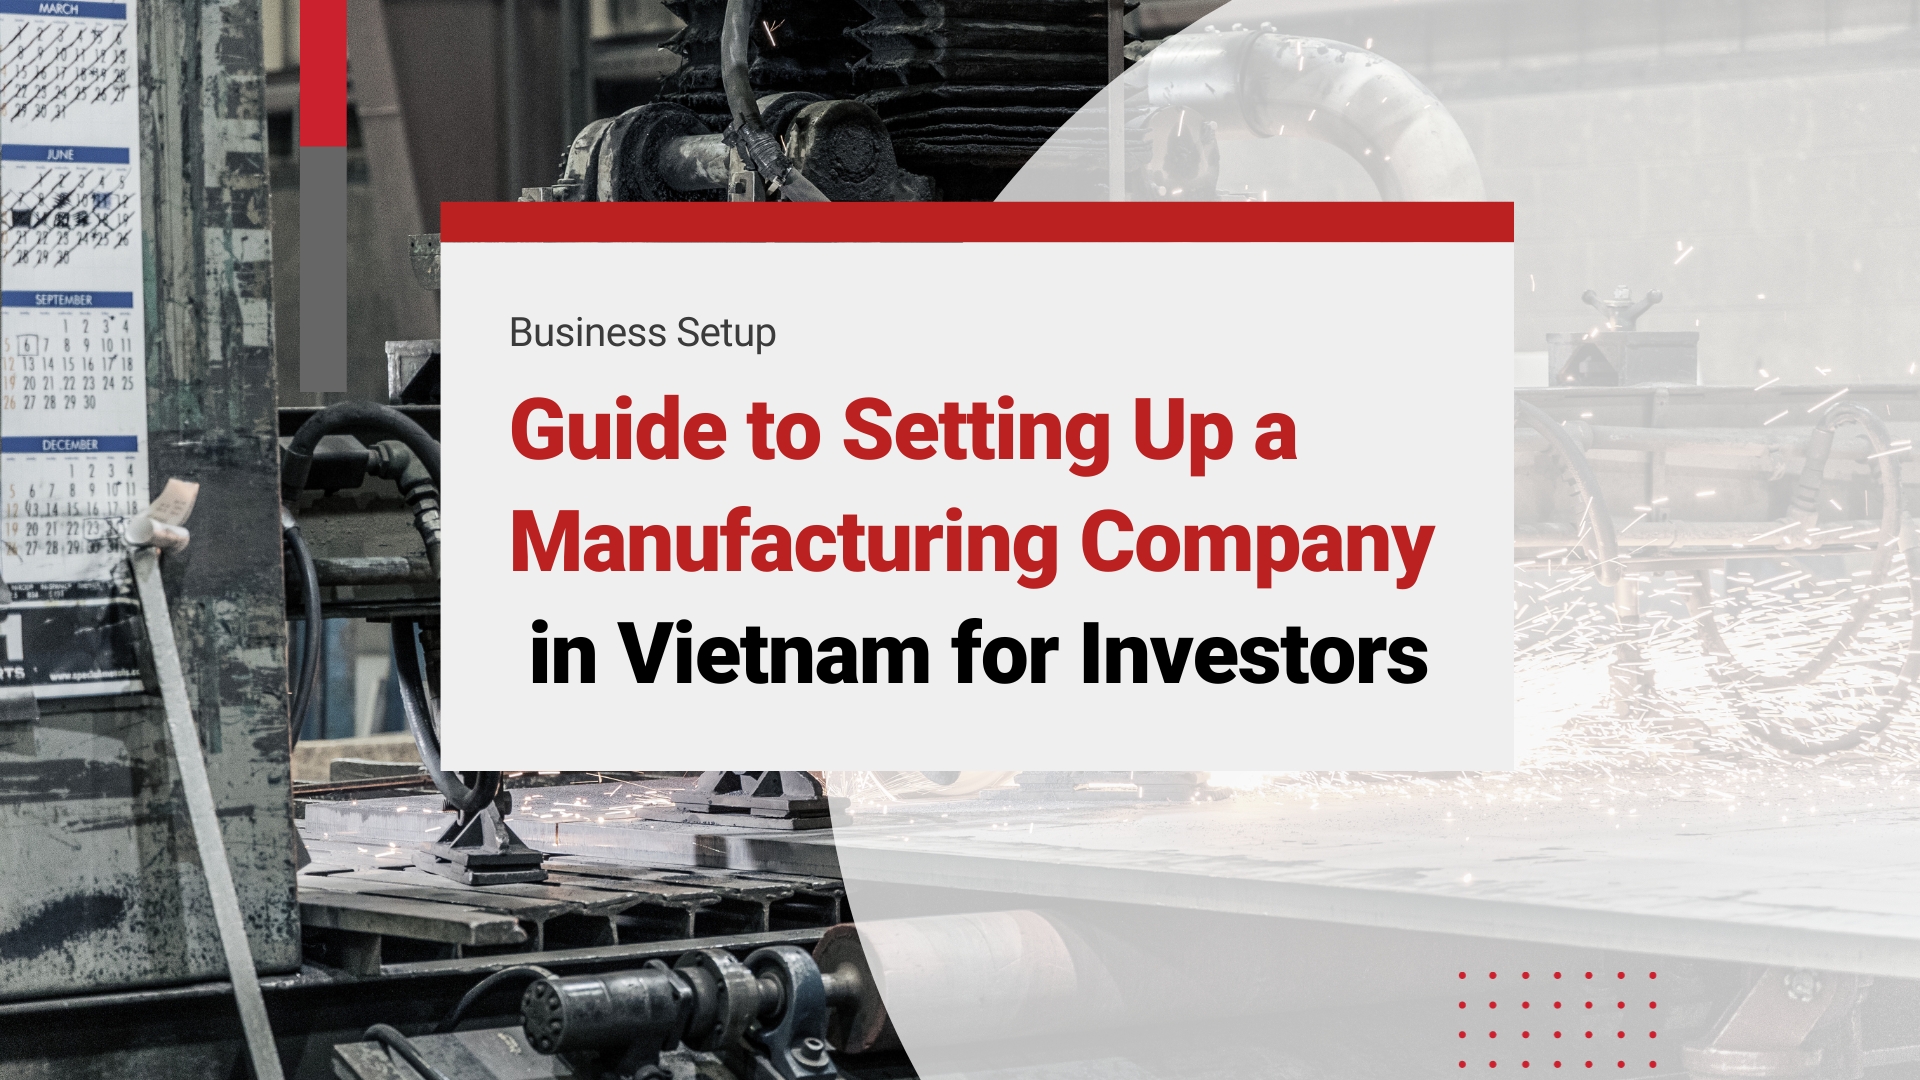 Guide to Setting Up a Manufacturing Company in Vietnam for Investors